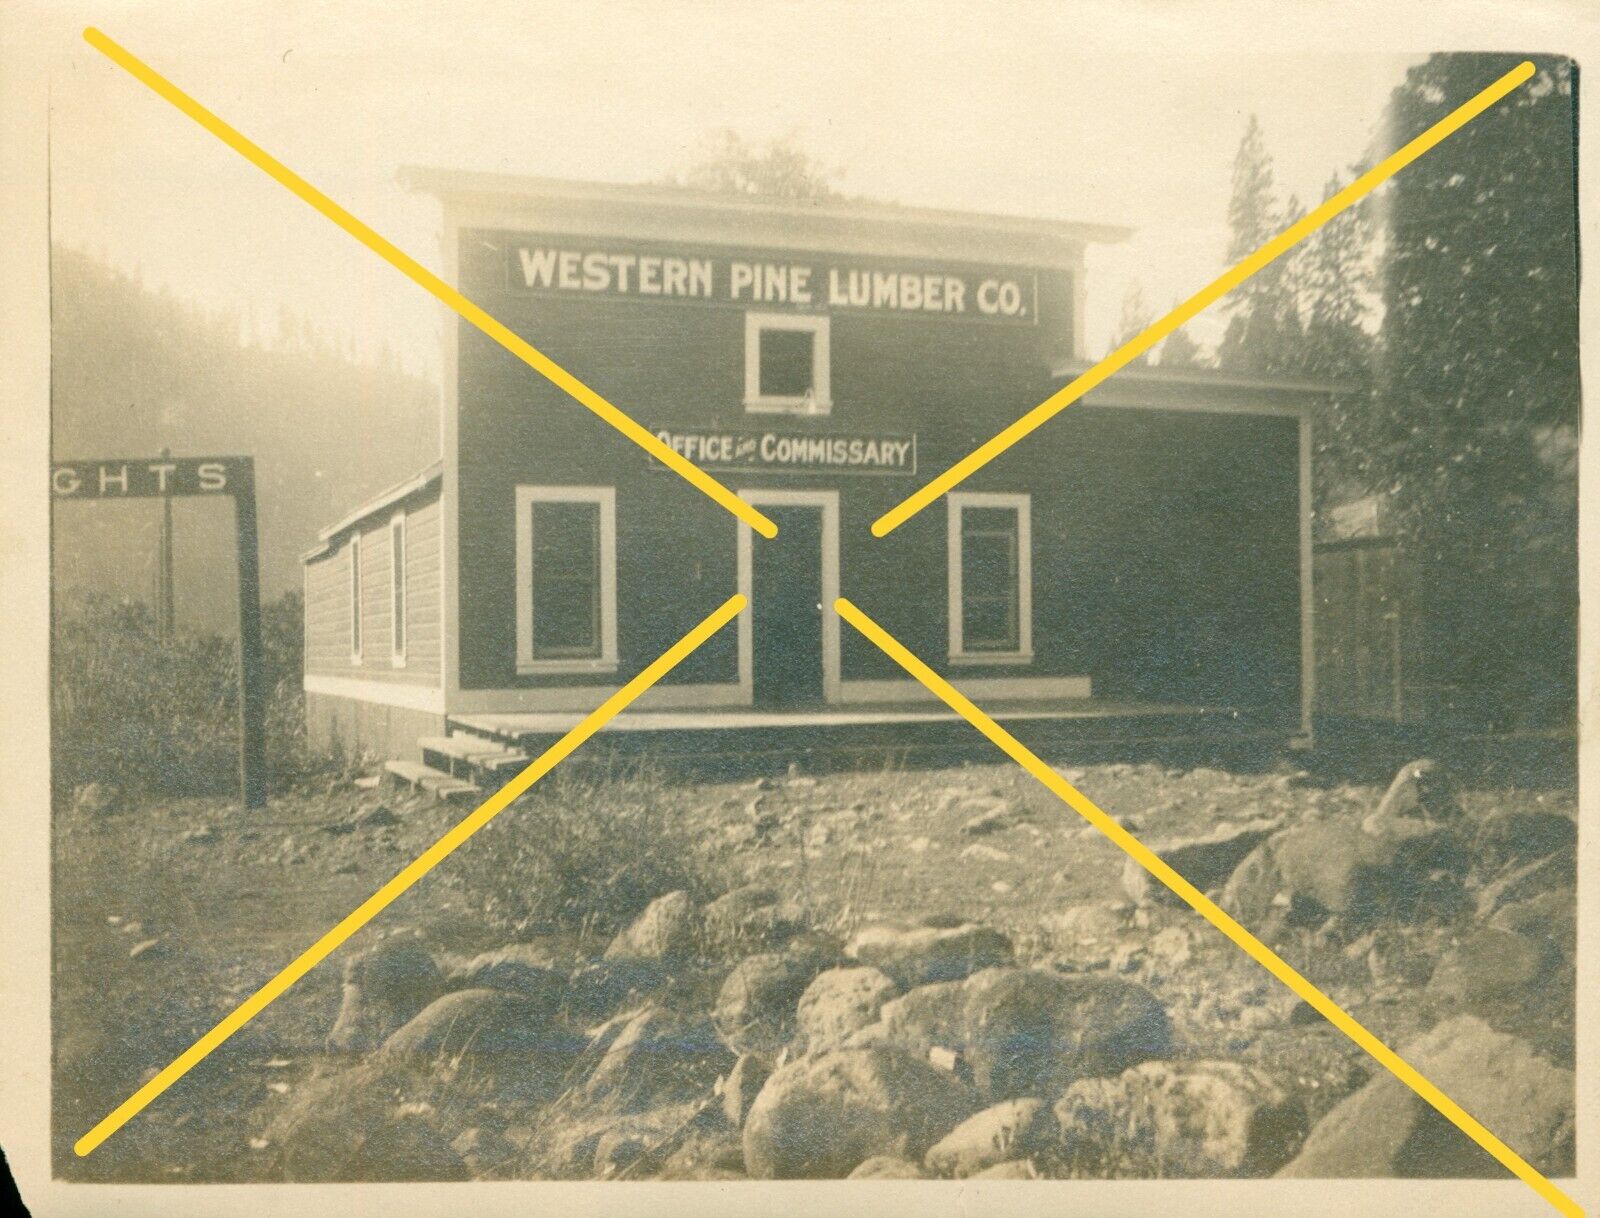 1909 1st photo Western Pine Lumber Co. Office Commissary Klickitat Wrights